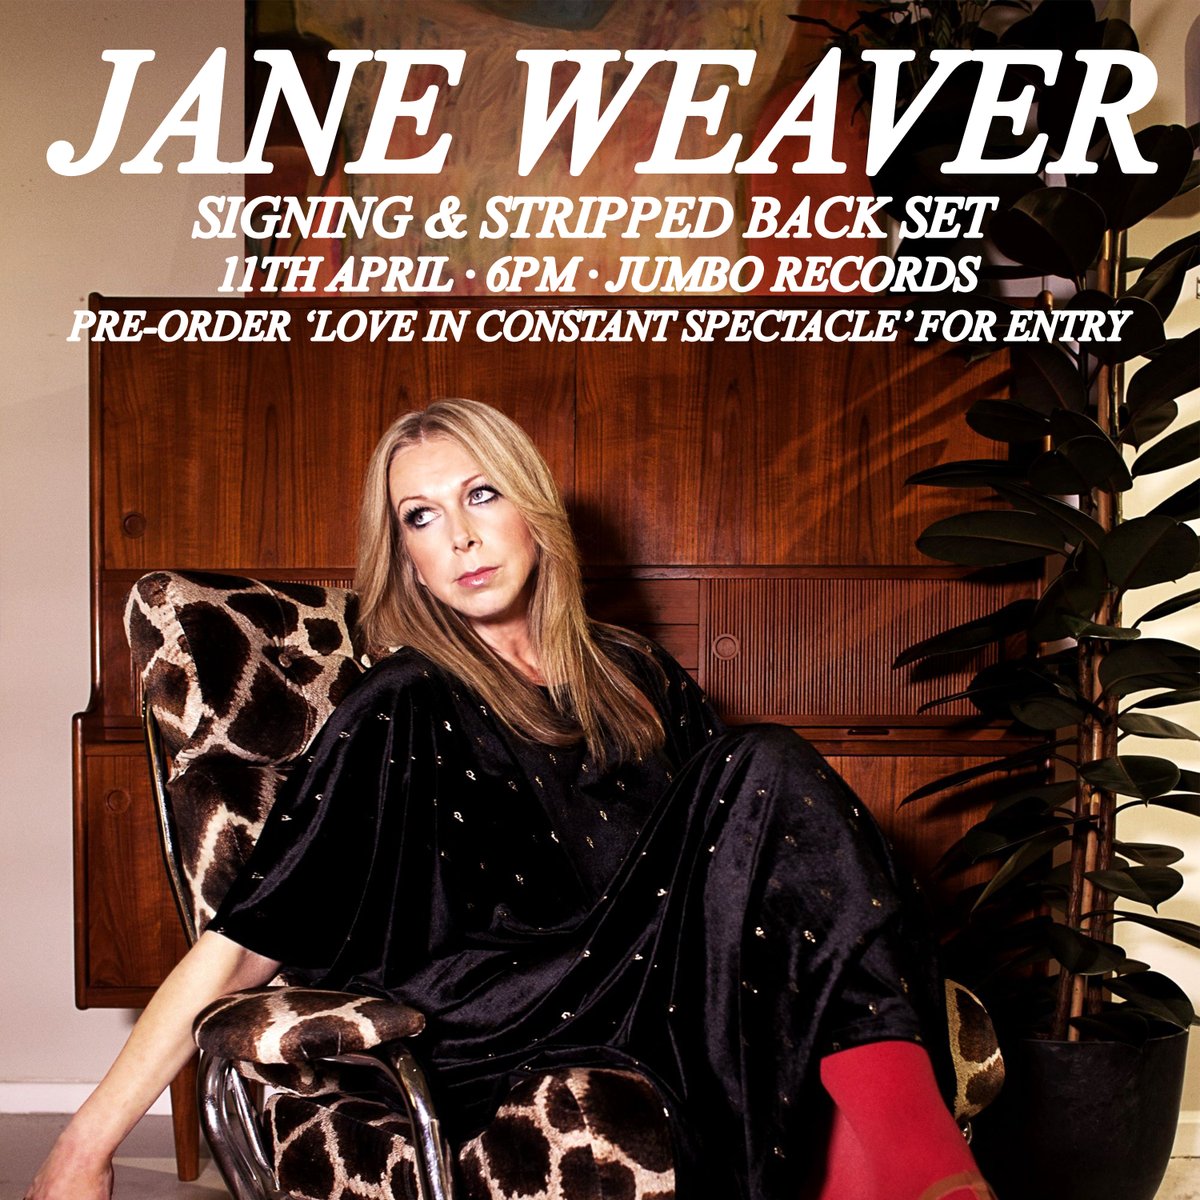 Tonight! 6pm! Jane Weaver live at Jumbo Records! Followed by a signing session. Secure your entry to the gig here: jumborecords.co.uk/music-single.a…